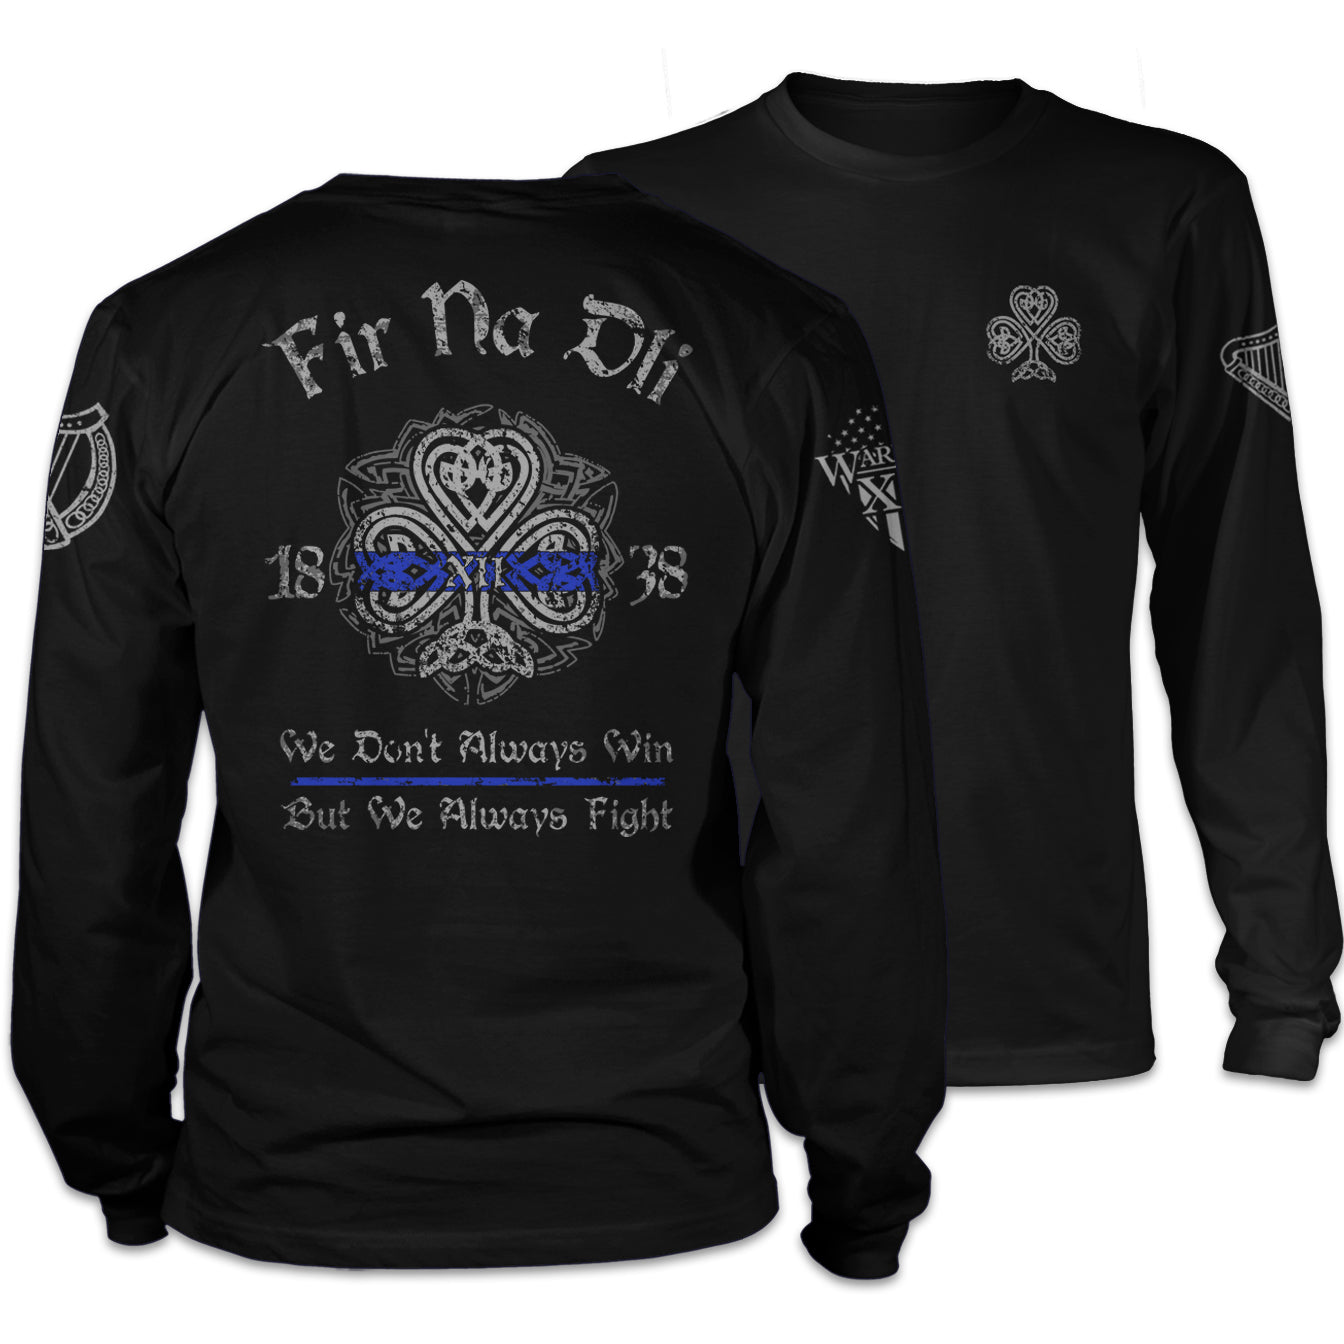 Front & back black long sleeve shirt paying tribute to history and traditions of Irish American Law Enforcement and showing true Celtic Pride. Fir Na Dli, meaning, men of law??ç?£ in Gaelic, is written across the back.